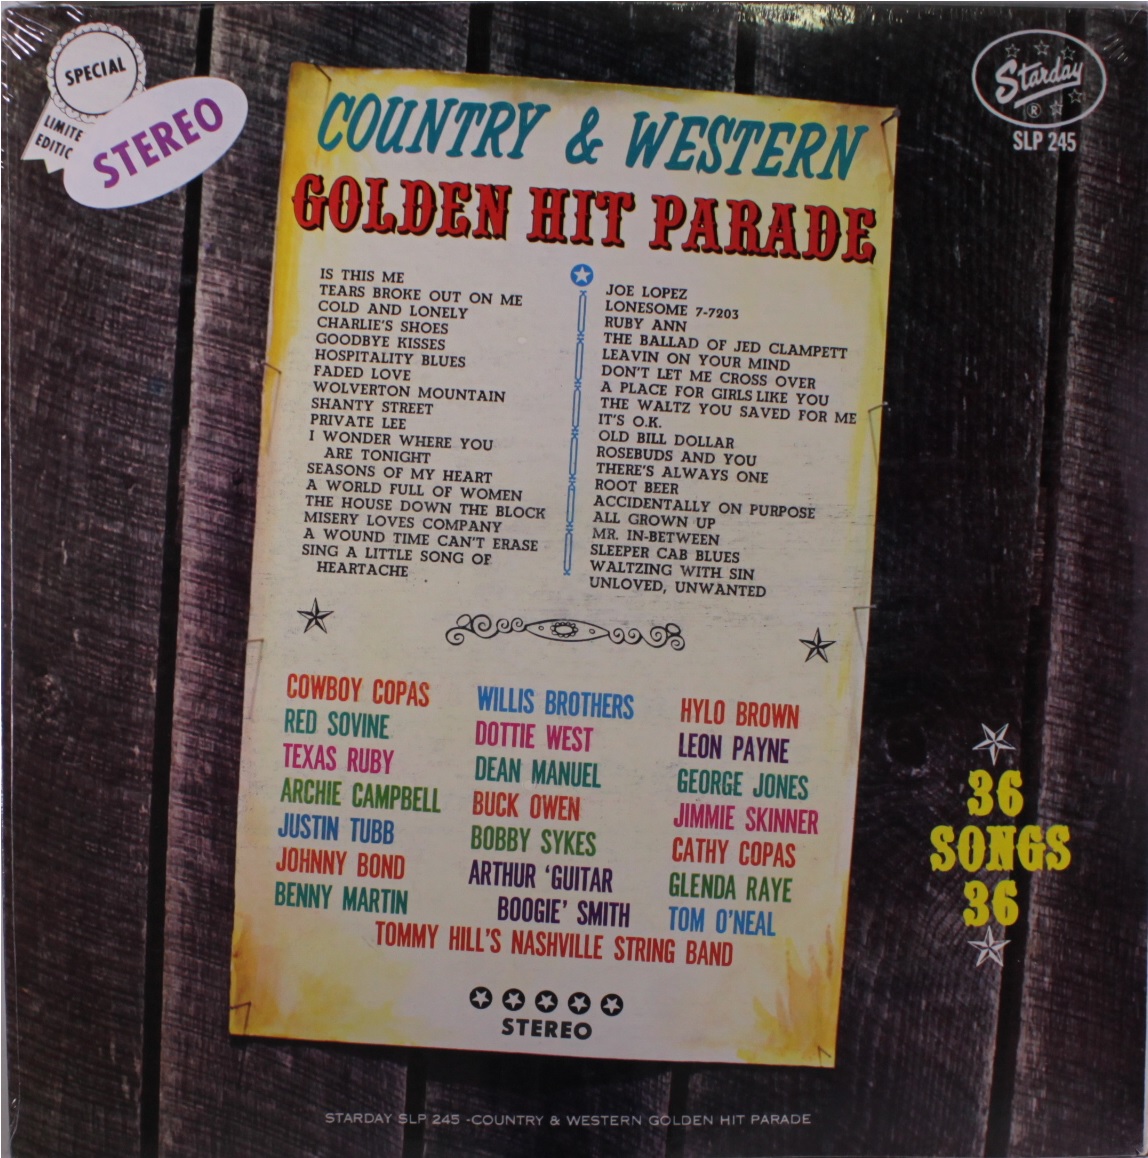 Starday Country & Western Golden Hit Parade